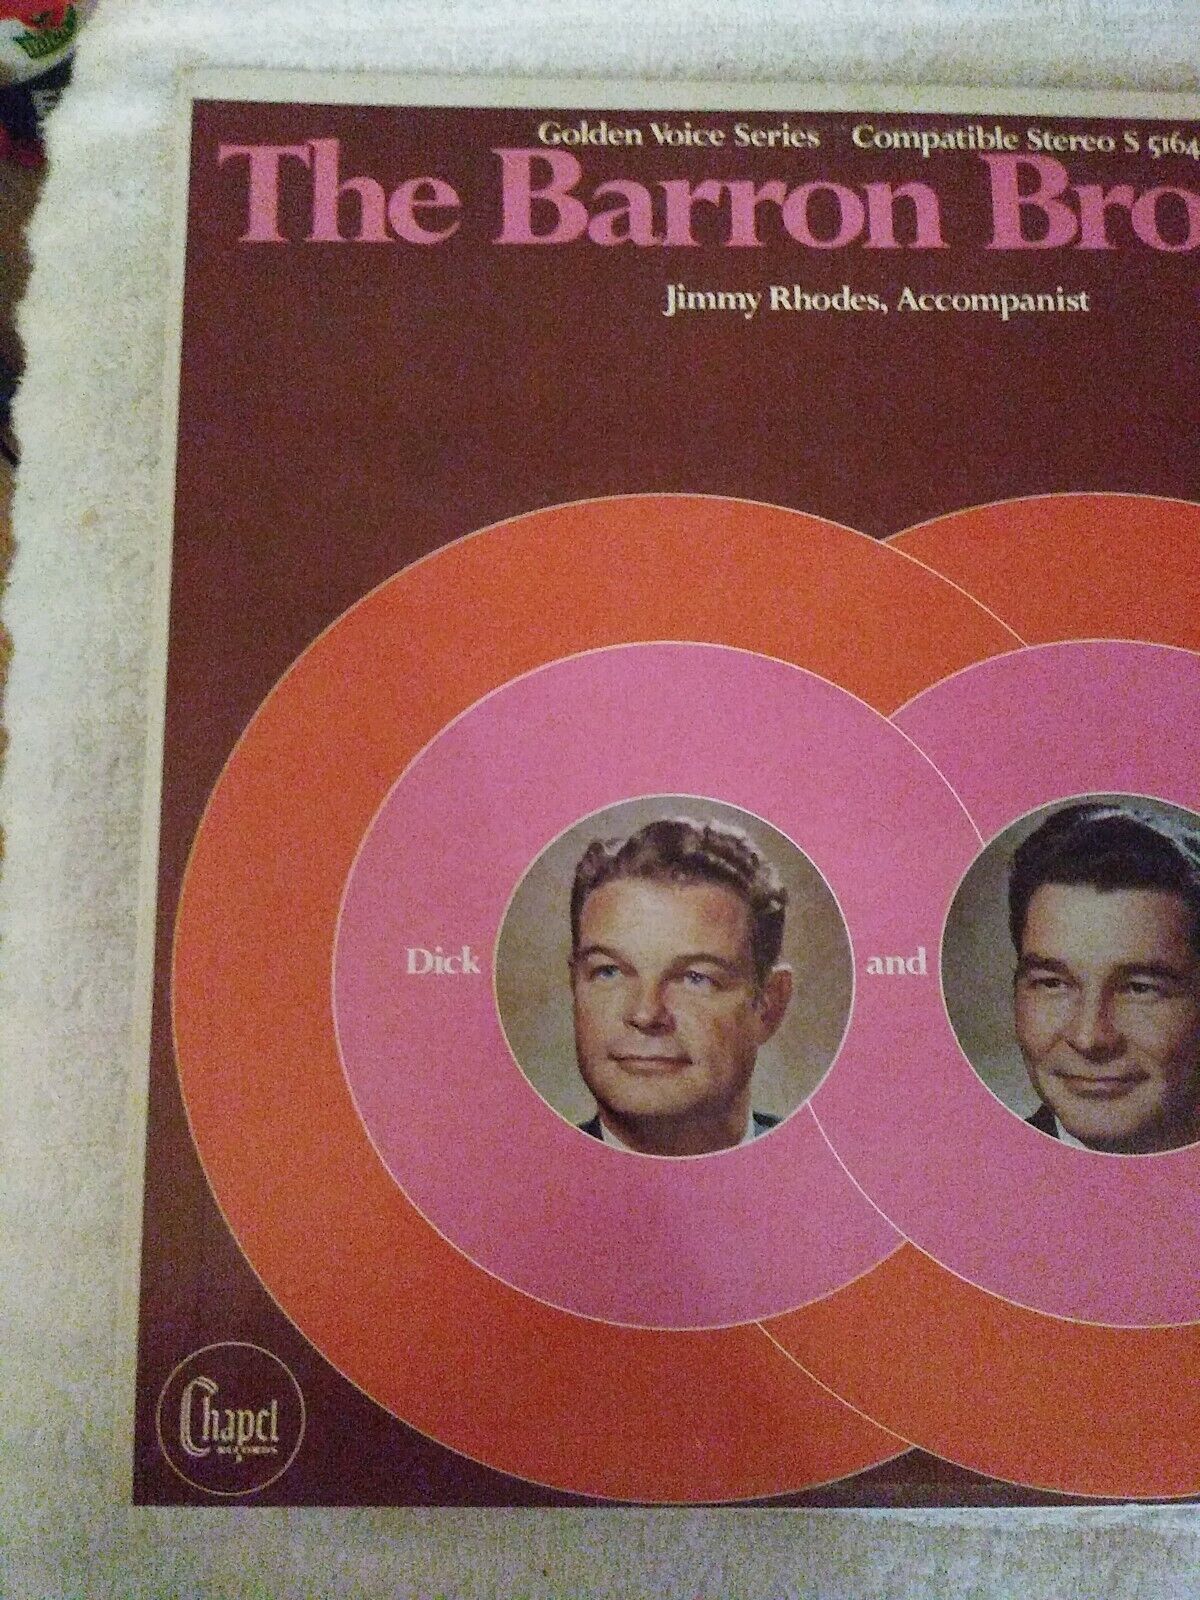 The Barron Brothers Dick & Henry The Golden Voice Series Vinyl Record ST-5164-A